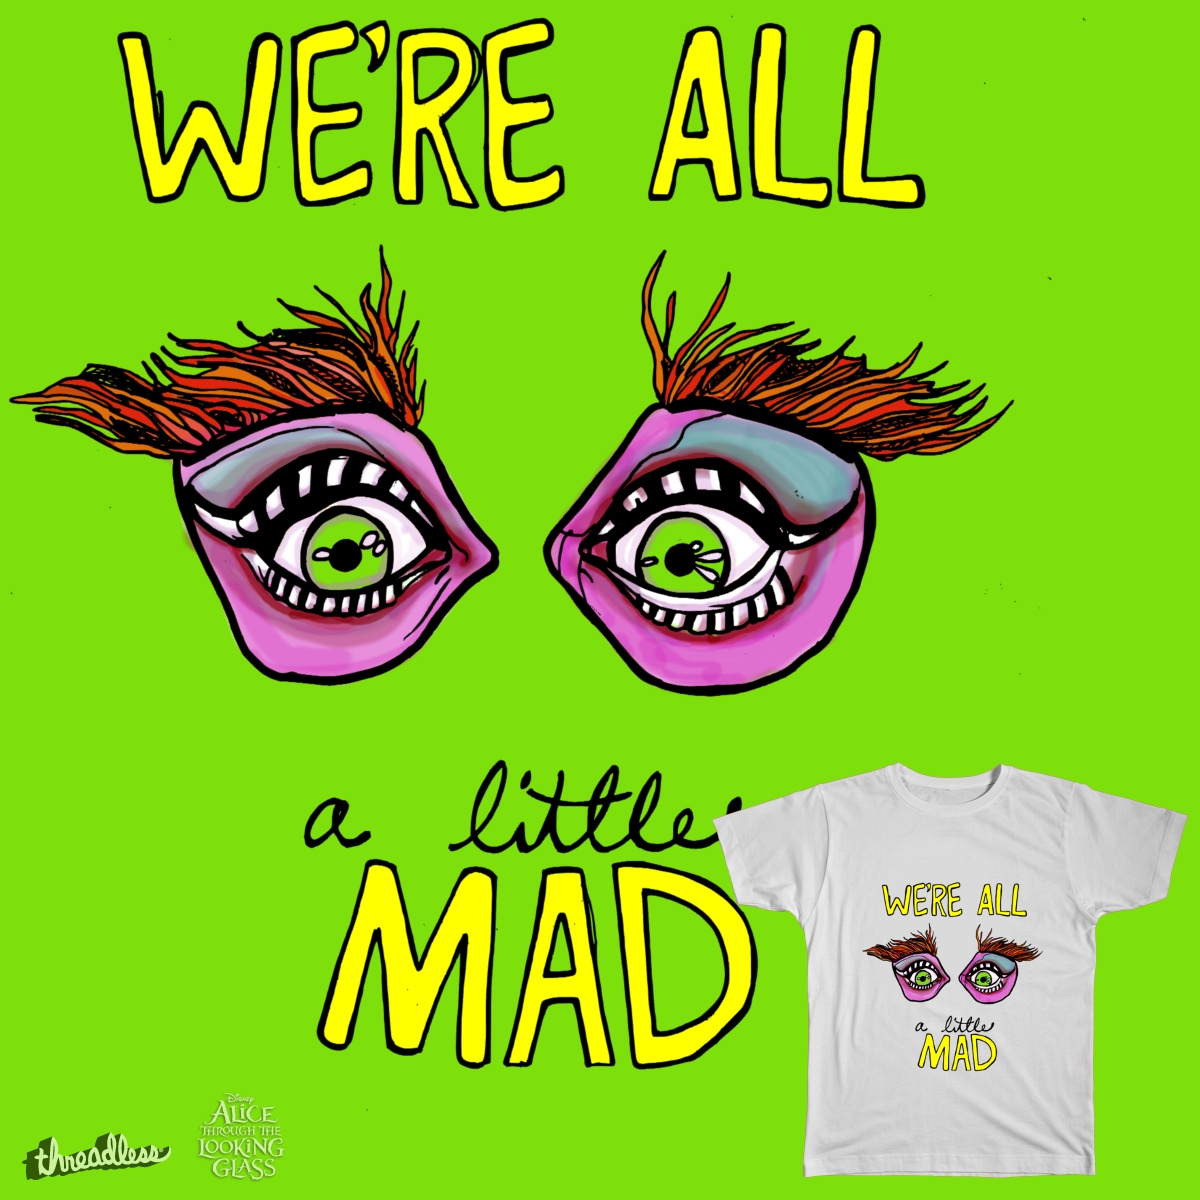 were-all-mad-here-alice-threadless-contest-2016